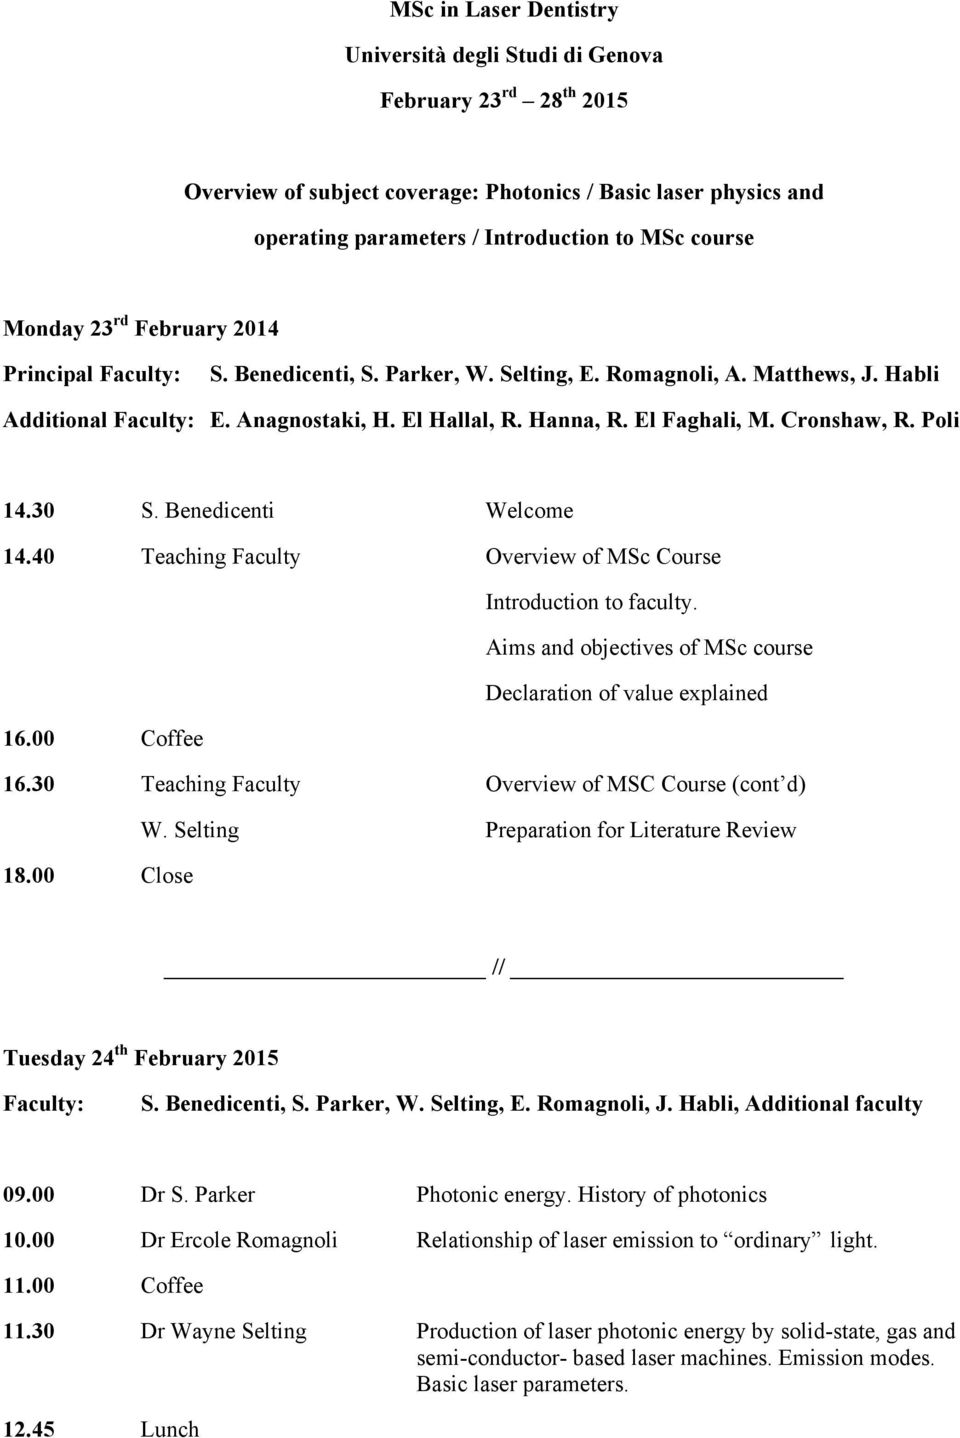 Cronshaw, R. Poli 14.30 S. Benedicenti Welcome 14.40 Teaching Faculty Overview of MSc Course Introduction to faculty. Aims and objectives of MSc course Declaration of value explained 16.00 Coffee 16.